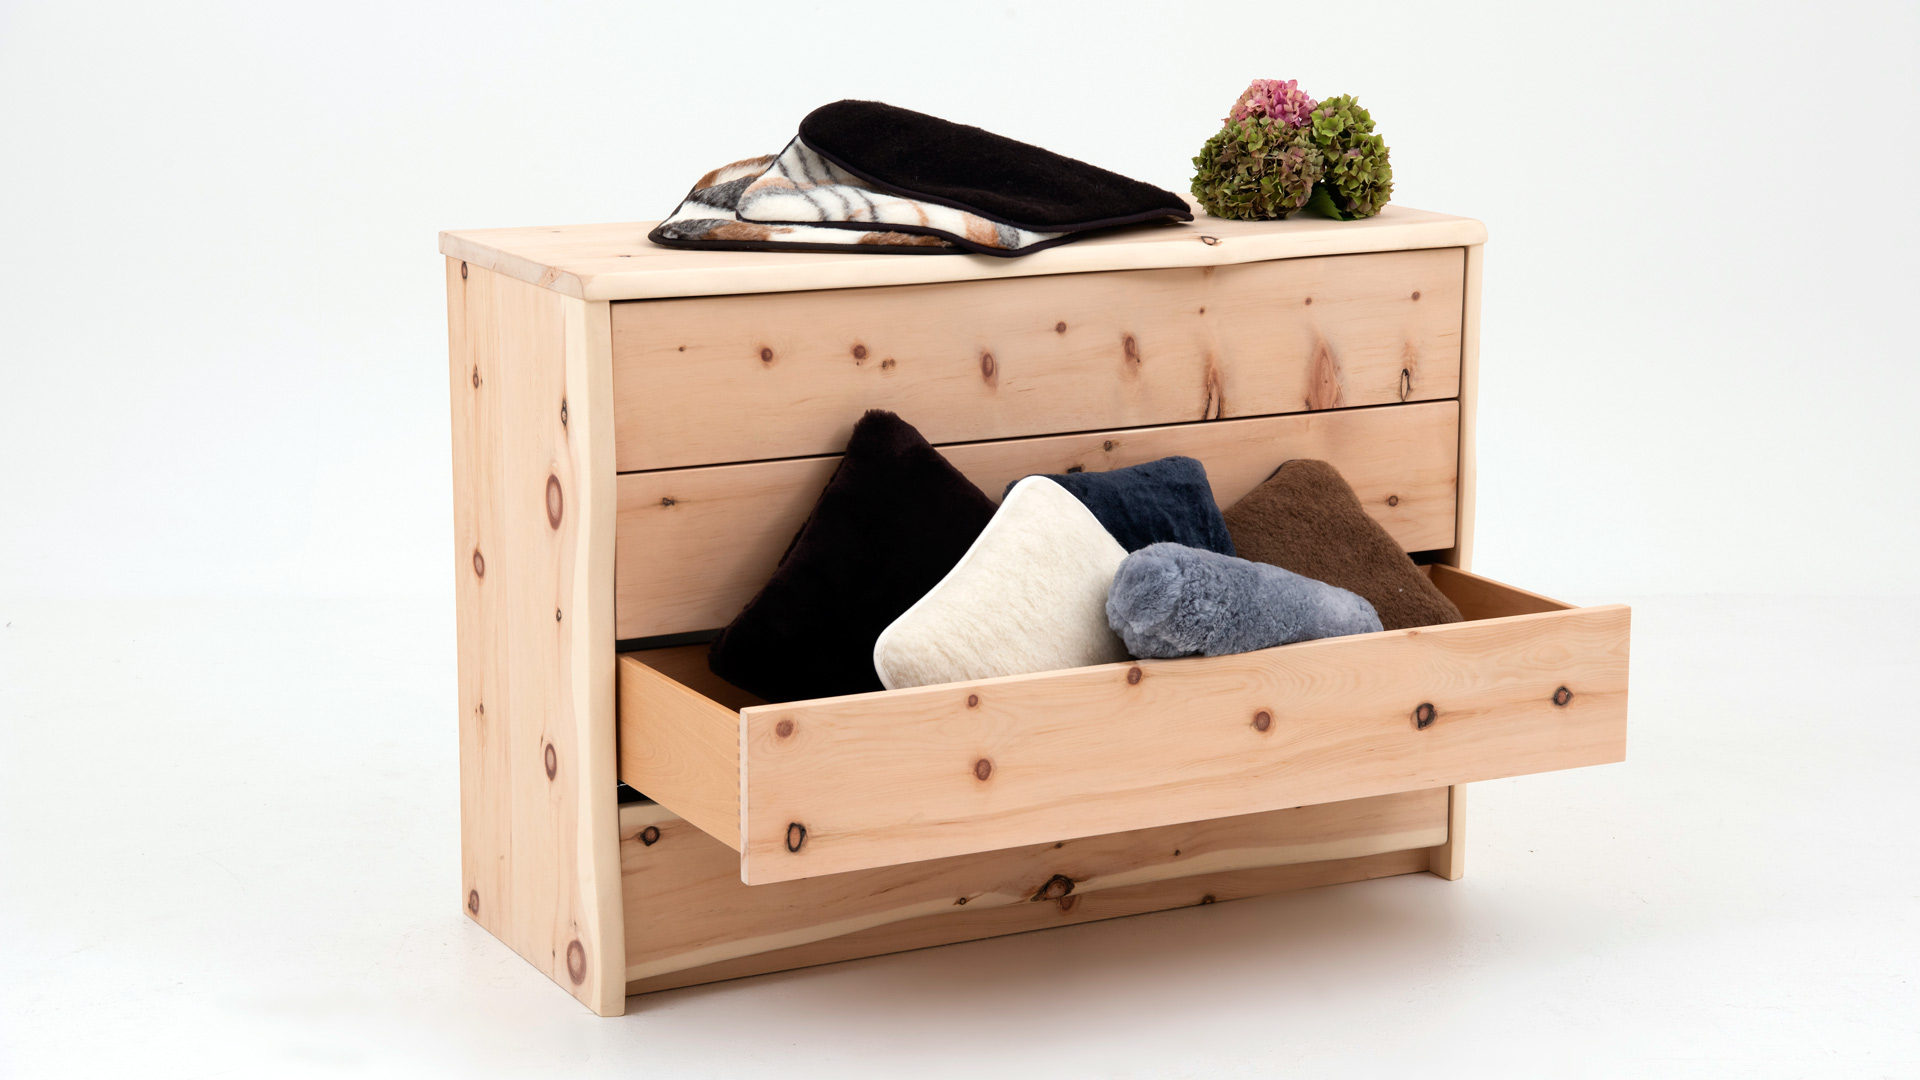 Woolen beds and bedding by Naturwollprodukte Ming AG, Swiss Made